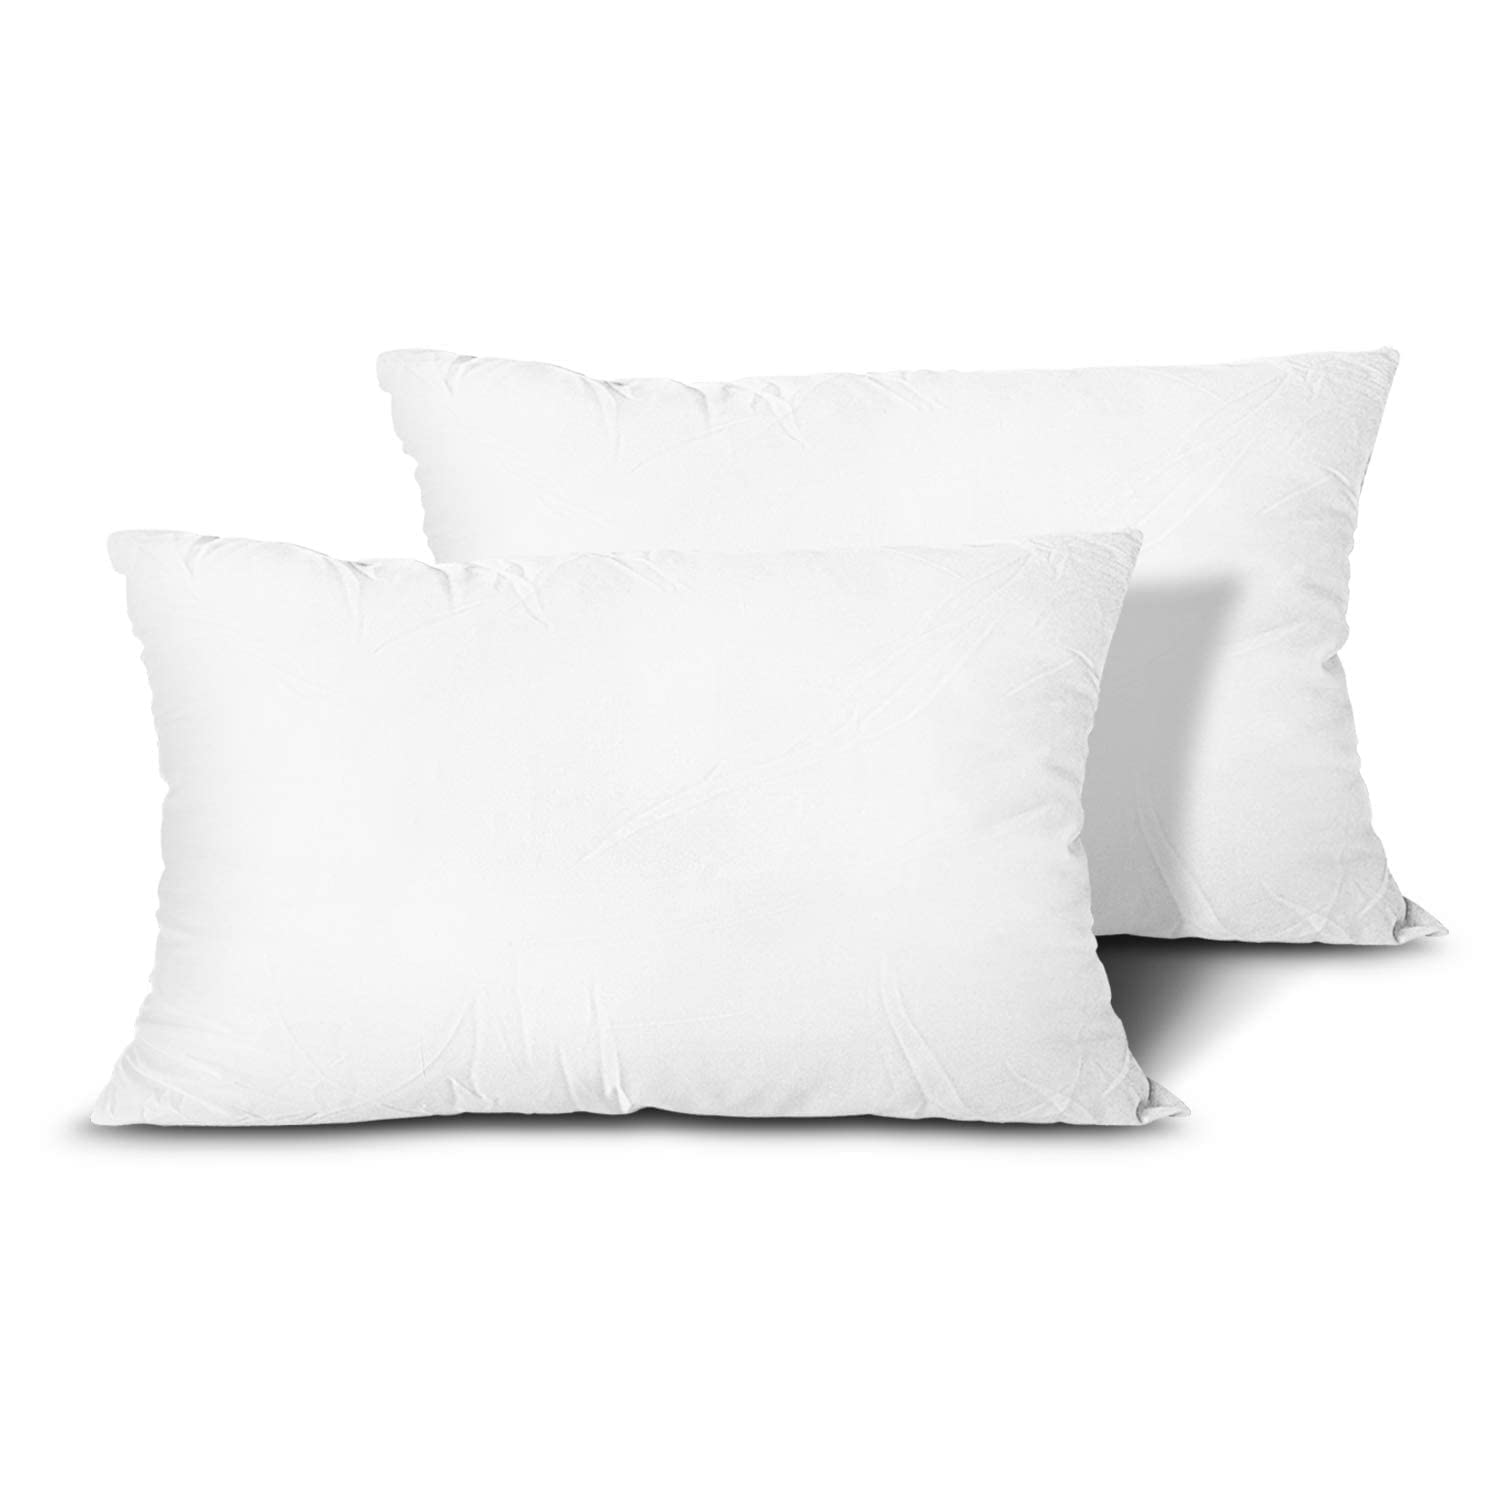 Book Cover Edow Throw Pillow Inserts, Set of 2 Lightweight Down Alternative Polyester Pillow, Couch Cushion, Sham Stuffer, Machine Washable. (White, 12x20)